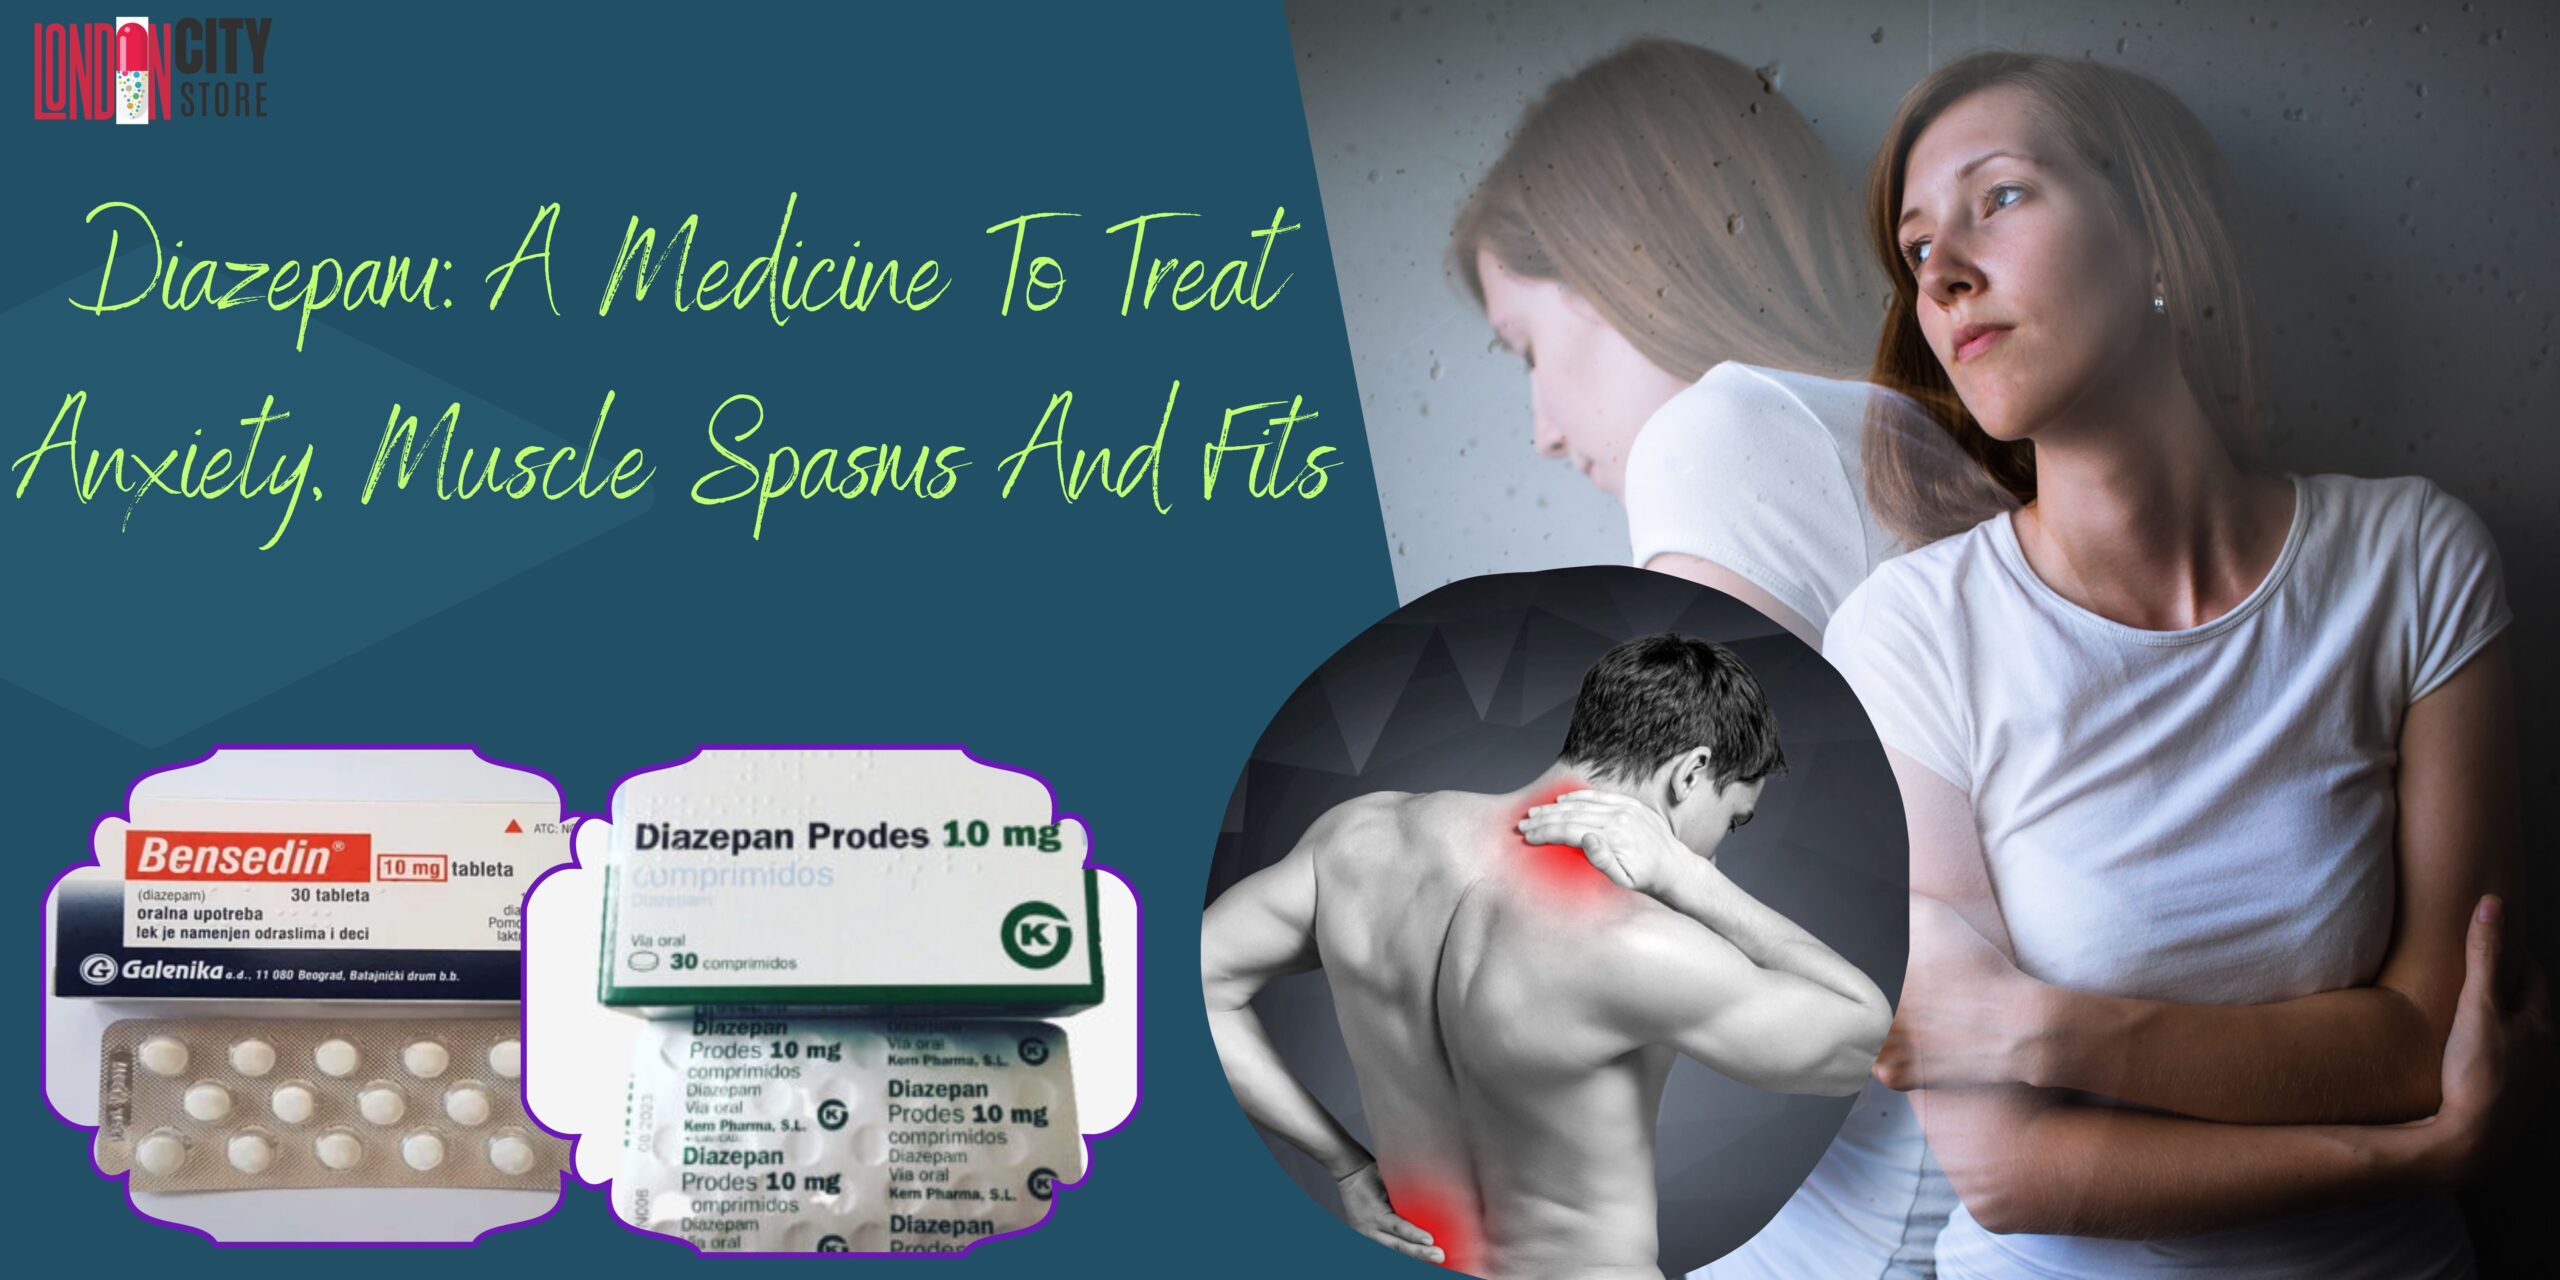 Diazepam: A Medicine To Treat Anxiety, Muscle Spasms And Fits